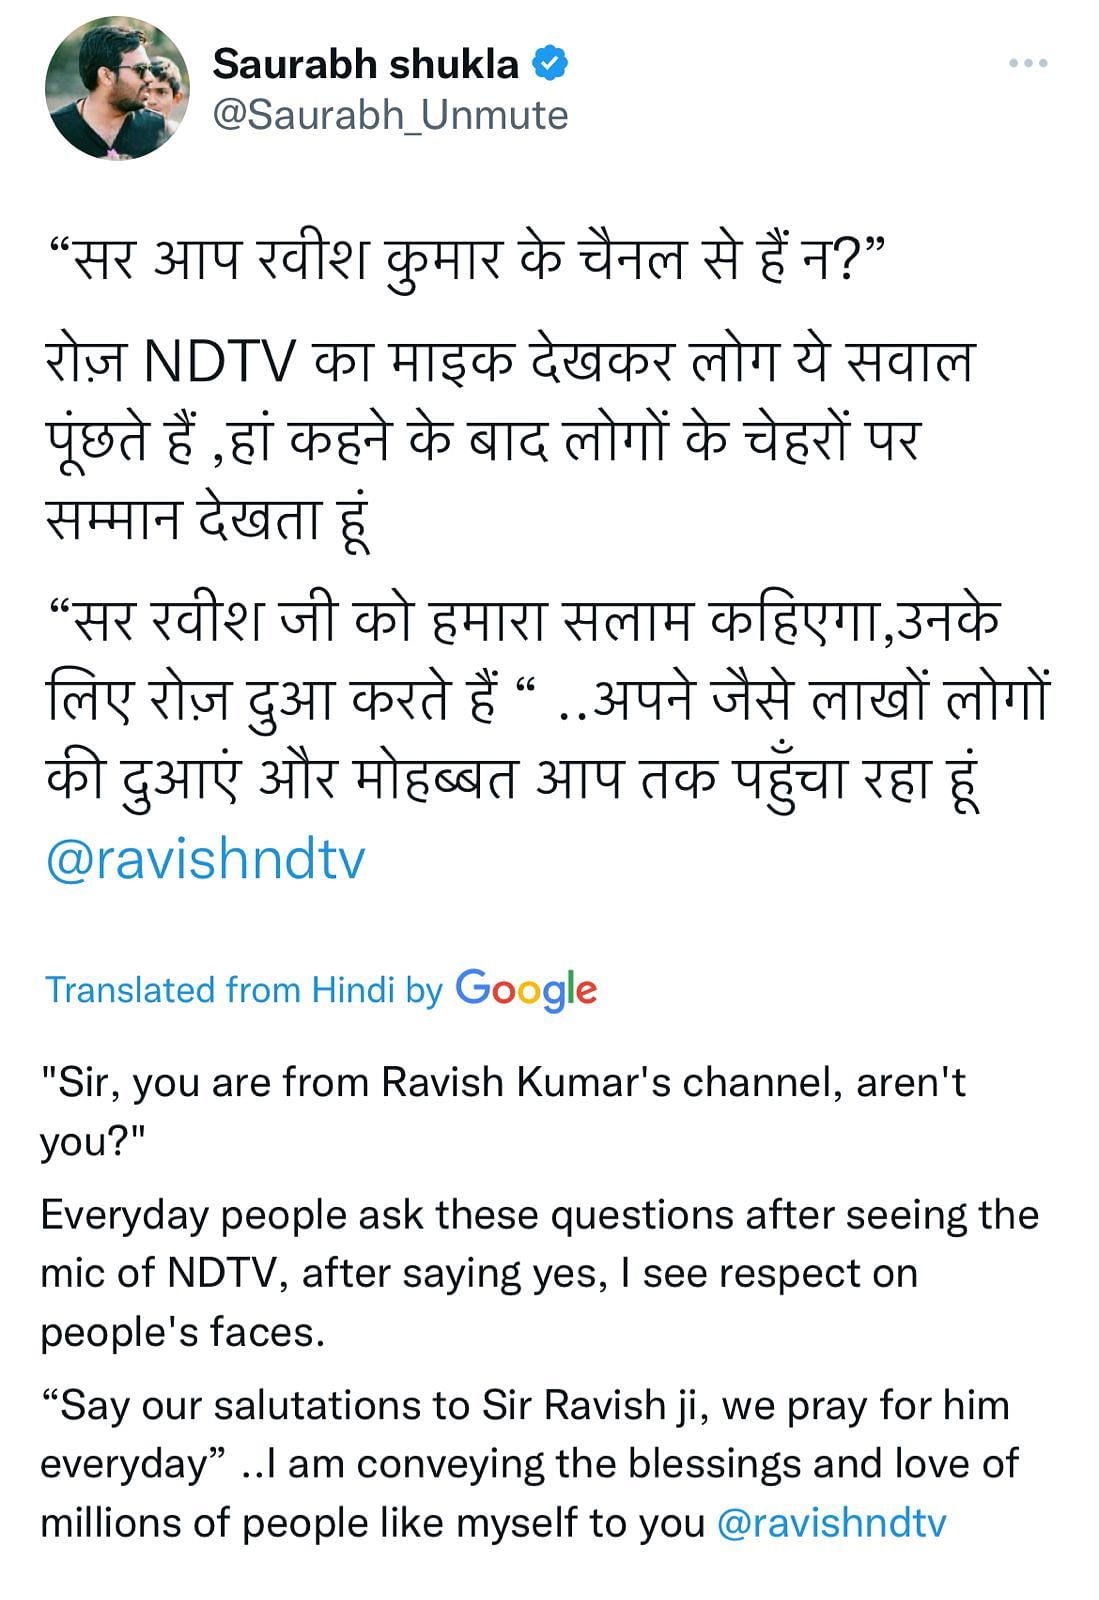 As soon as the news of Ravish Kumar's resignation broke, social media imploded with messages, memories & wishes.